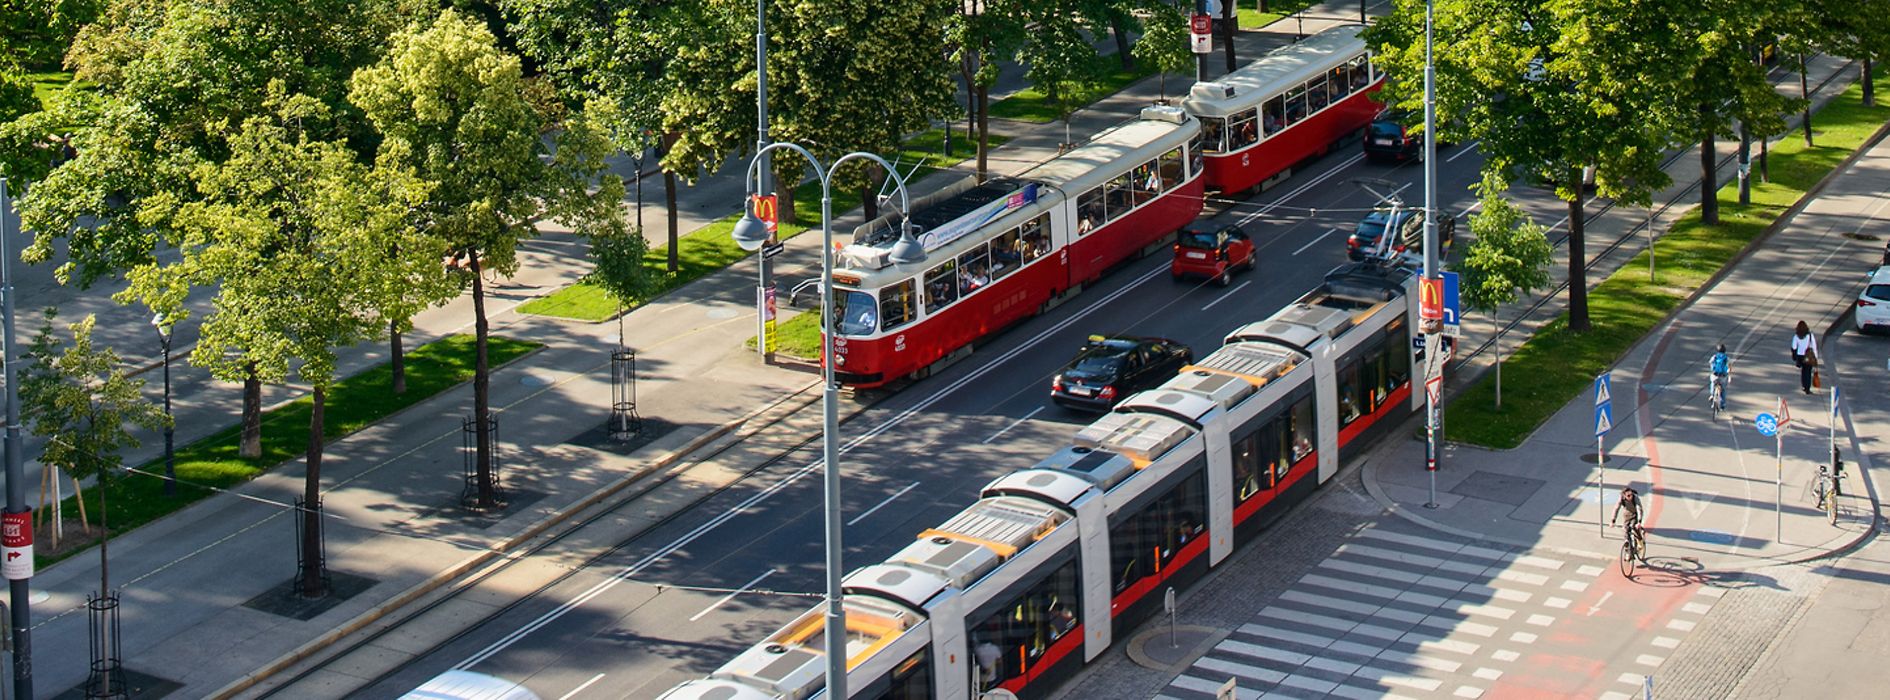 Trams at the Ringstrasse